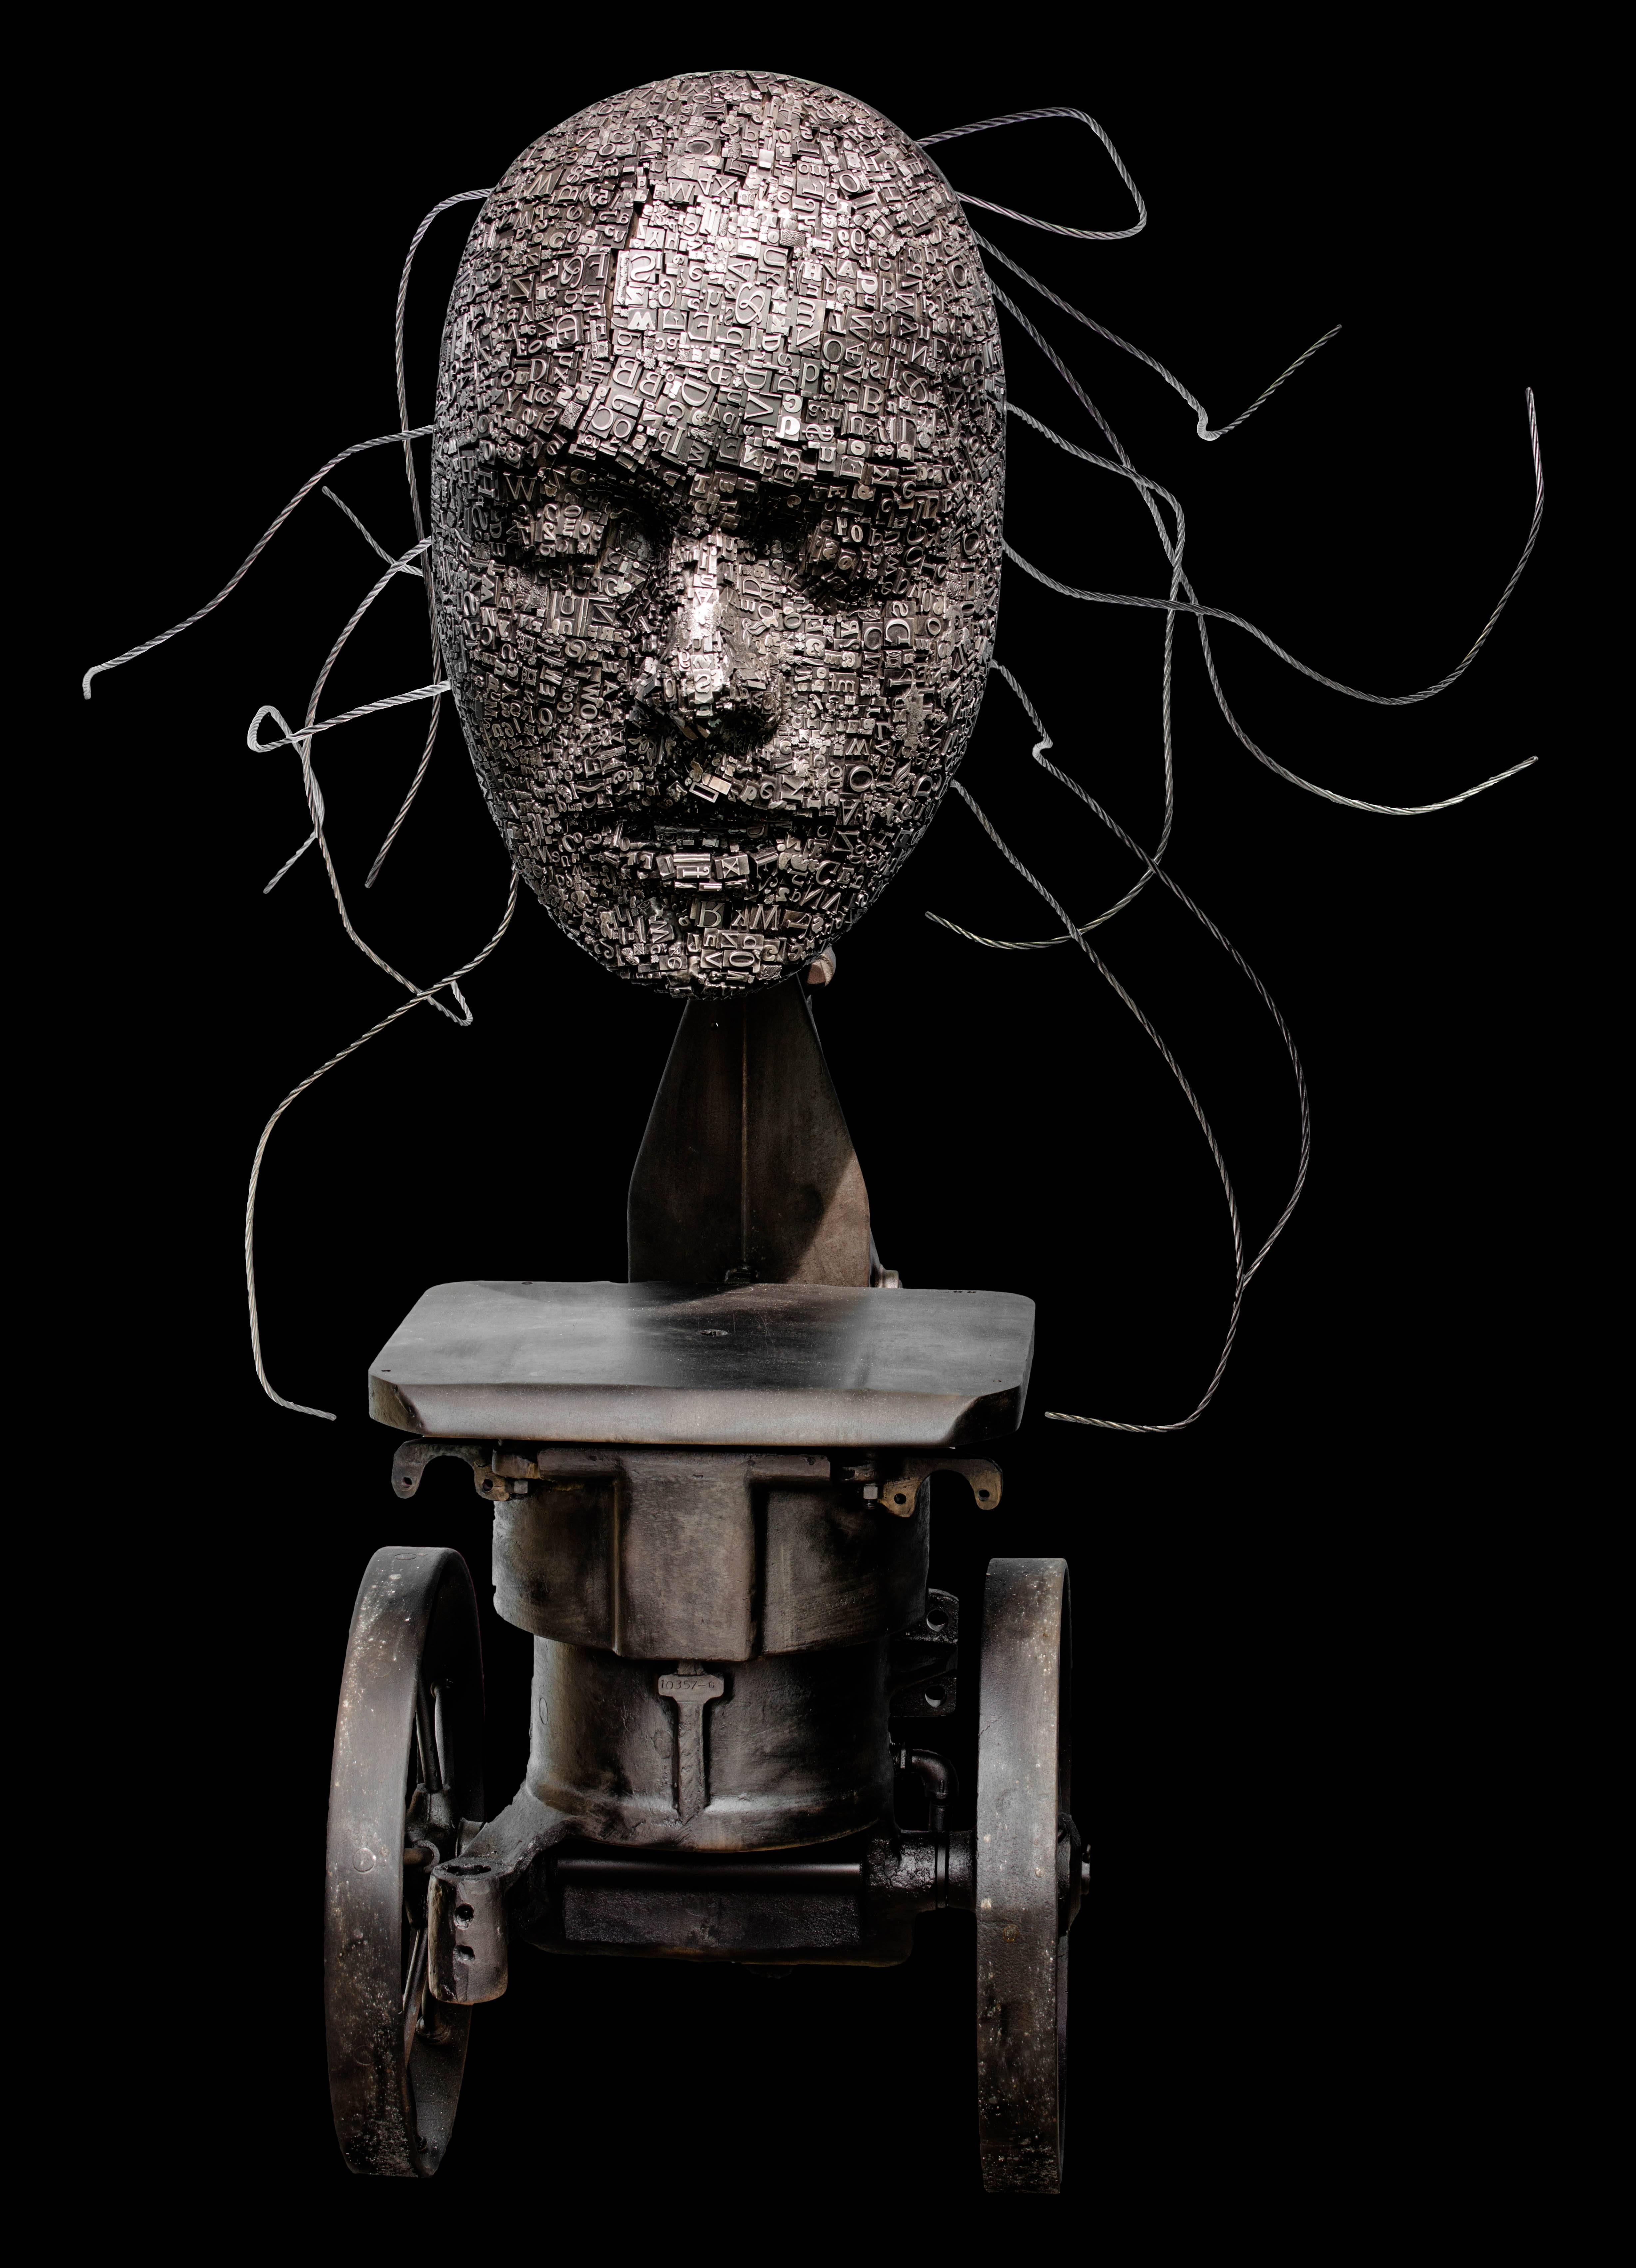 Dale Dunning Abstract Sculpture - Press - tall, steam-punk inspired, human face, lead, aluminum and iron sculpture